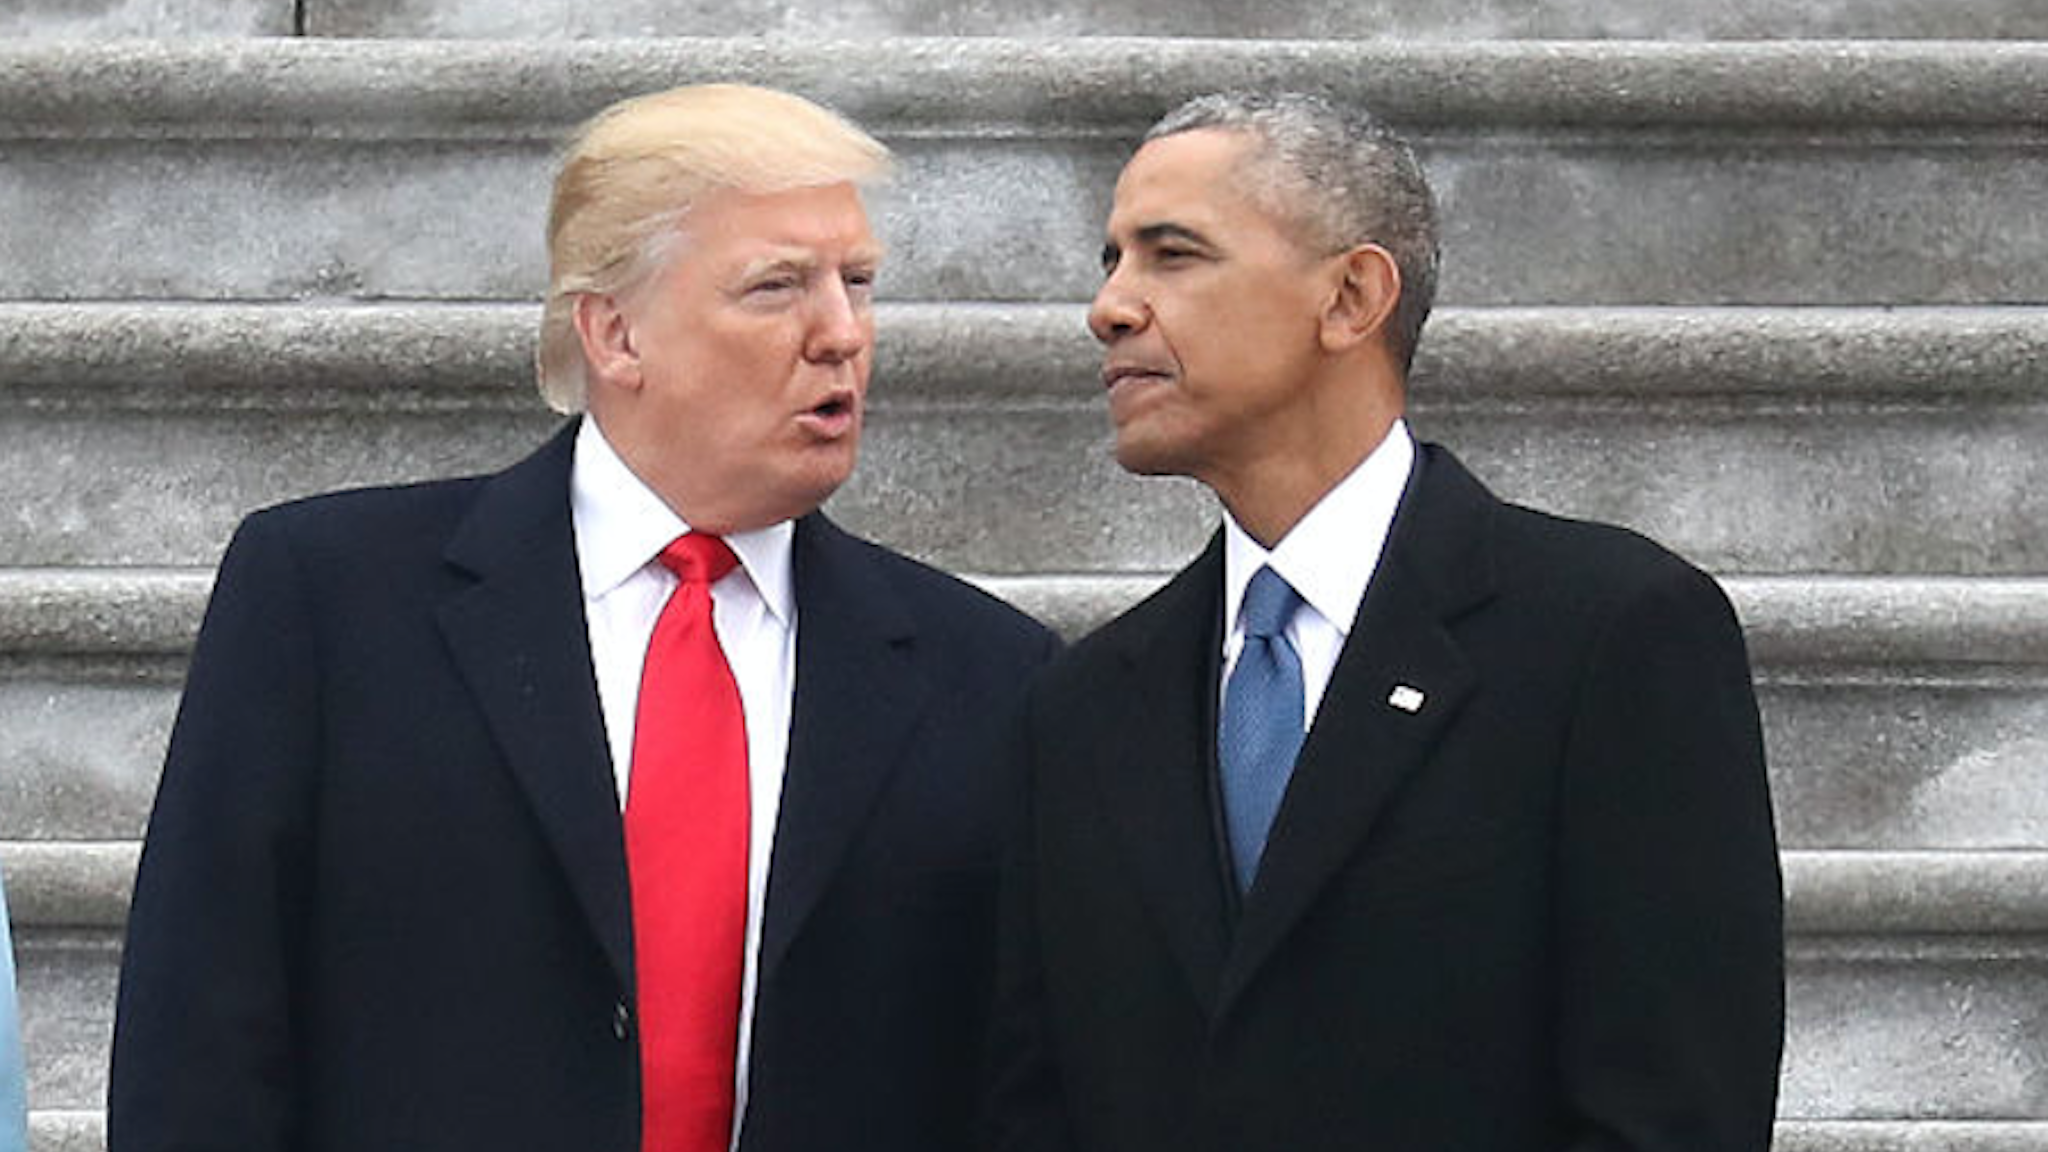 President Donald Trump and former president Barack Obama exchange words at the U.S. Capitol on January 20, 2017 in Washington, DC.